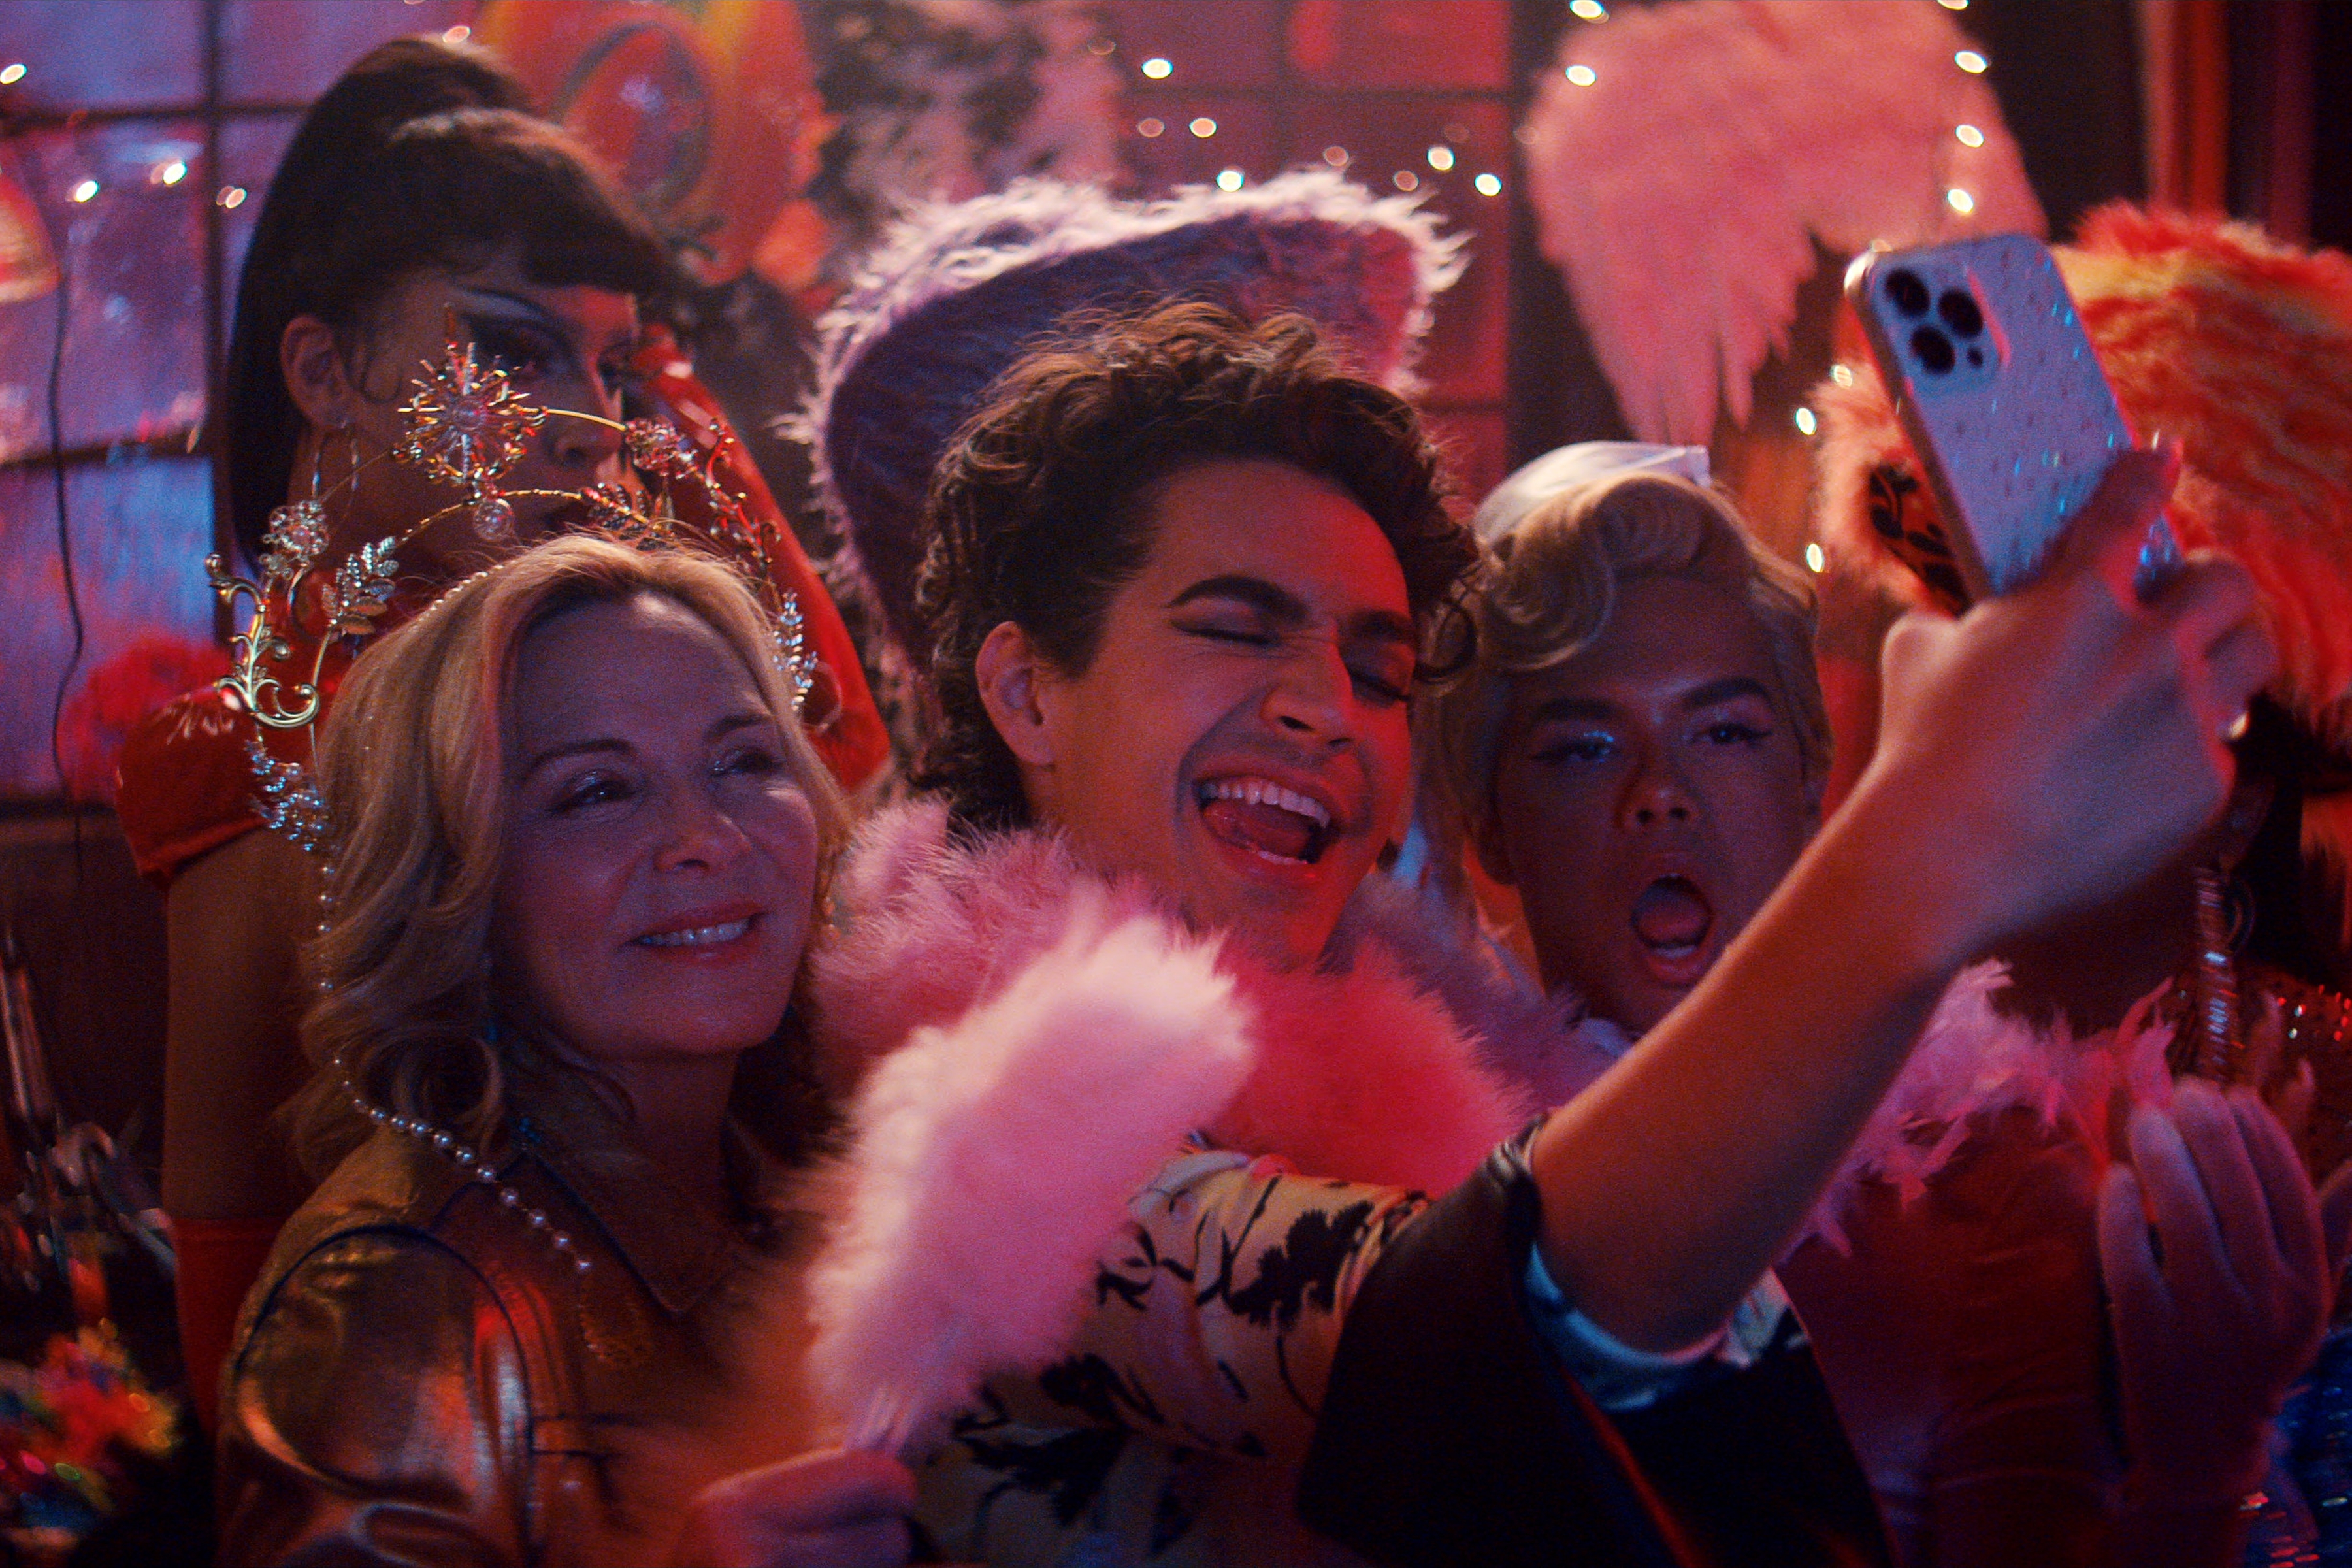 From left: Serena Tea, Kim Cattrall, Miss Benny, and Damian Terriquez in <i>Glamorous</i> (Netflix)